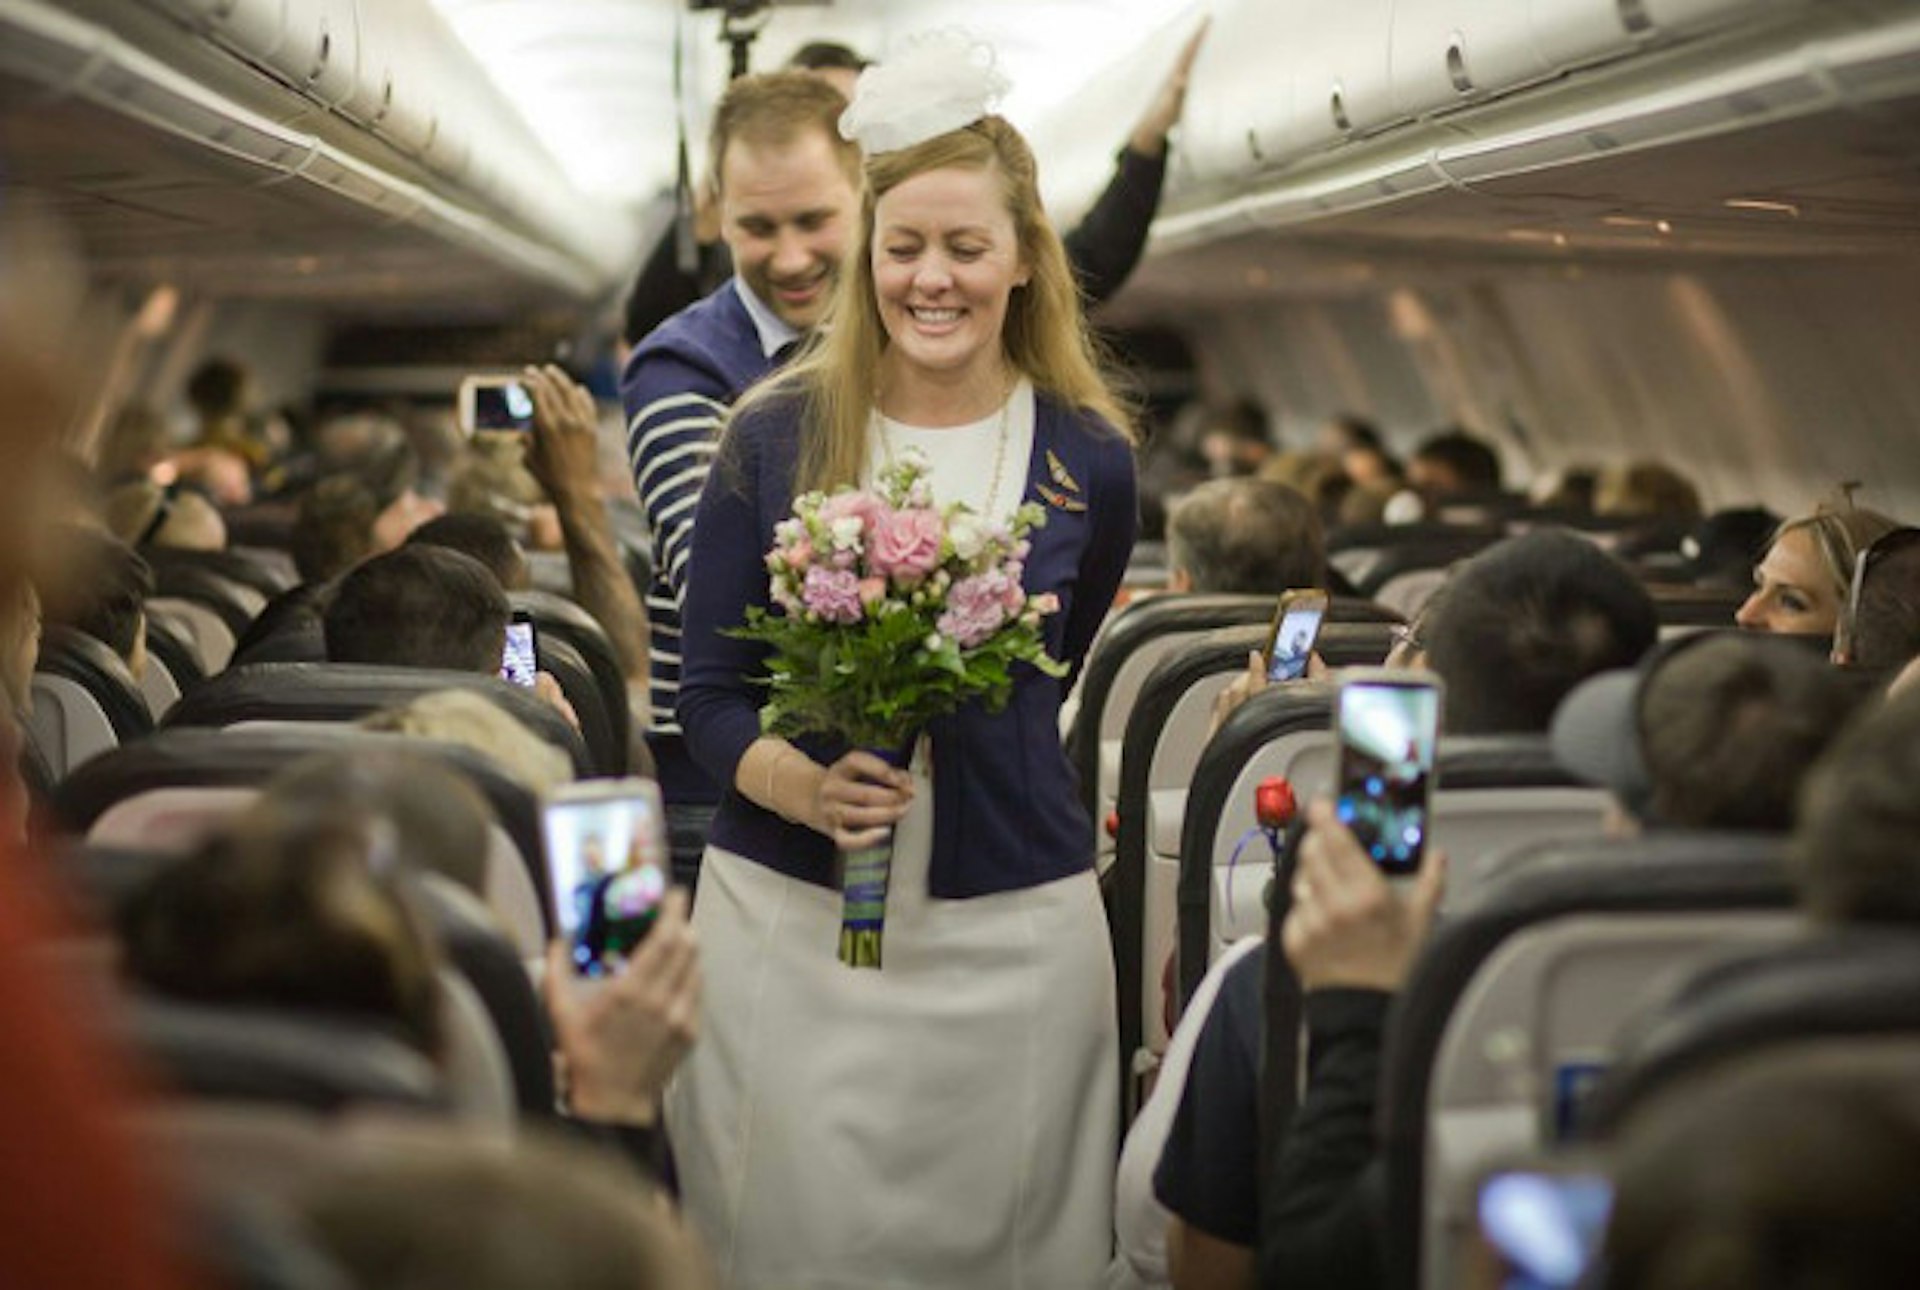 Kirsty and Jim exchanged vows on a packed plane.